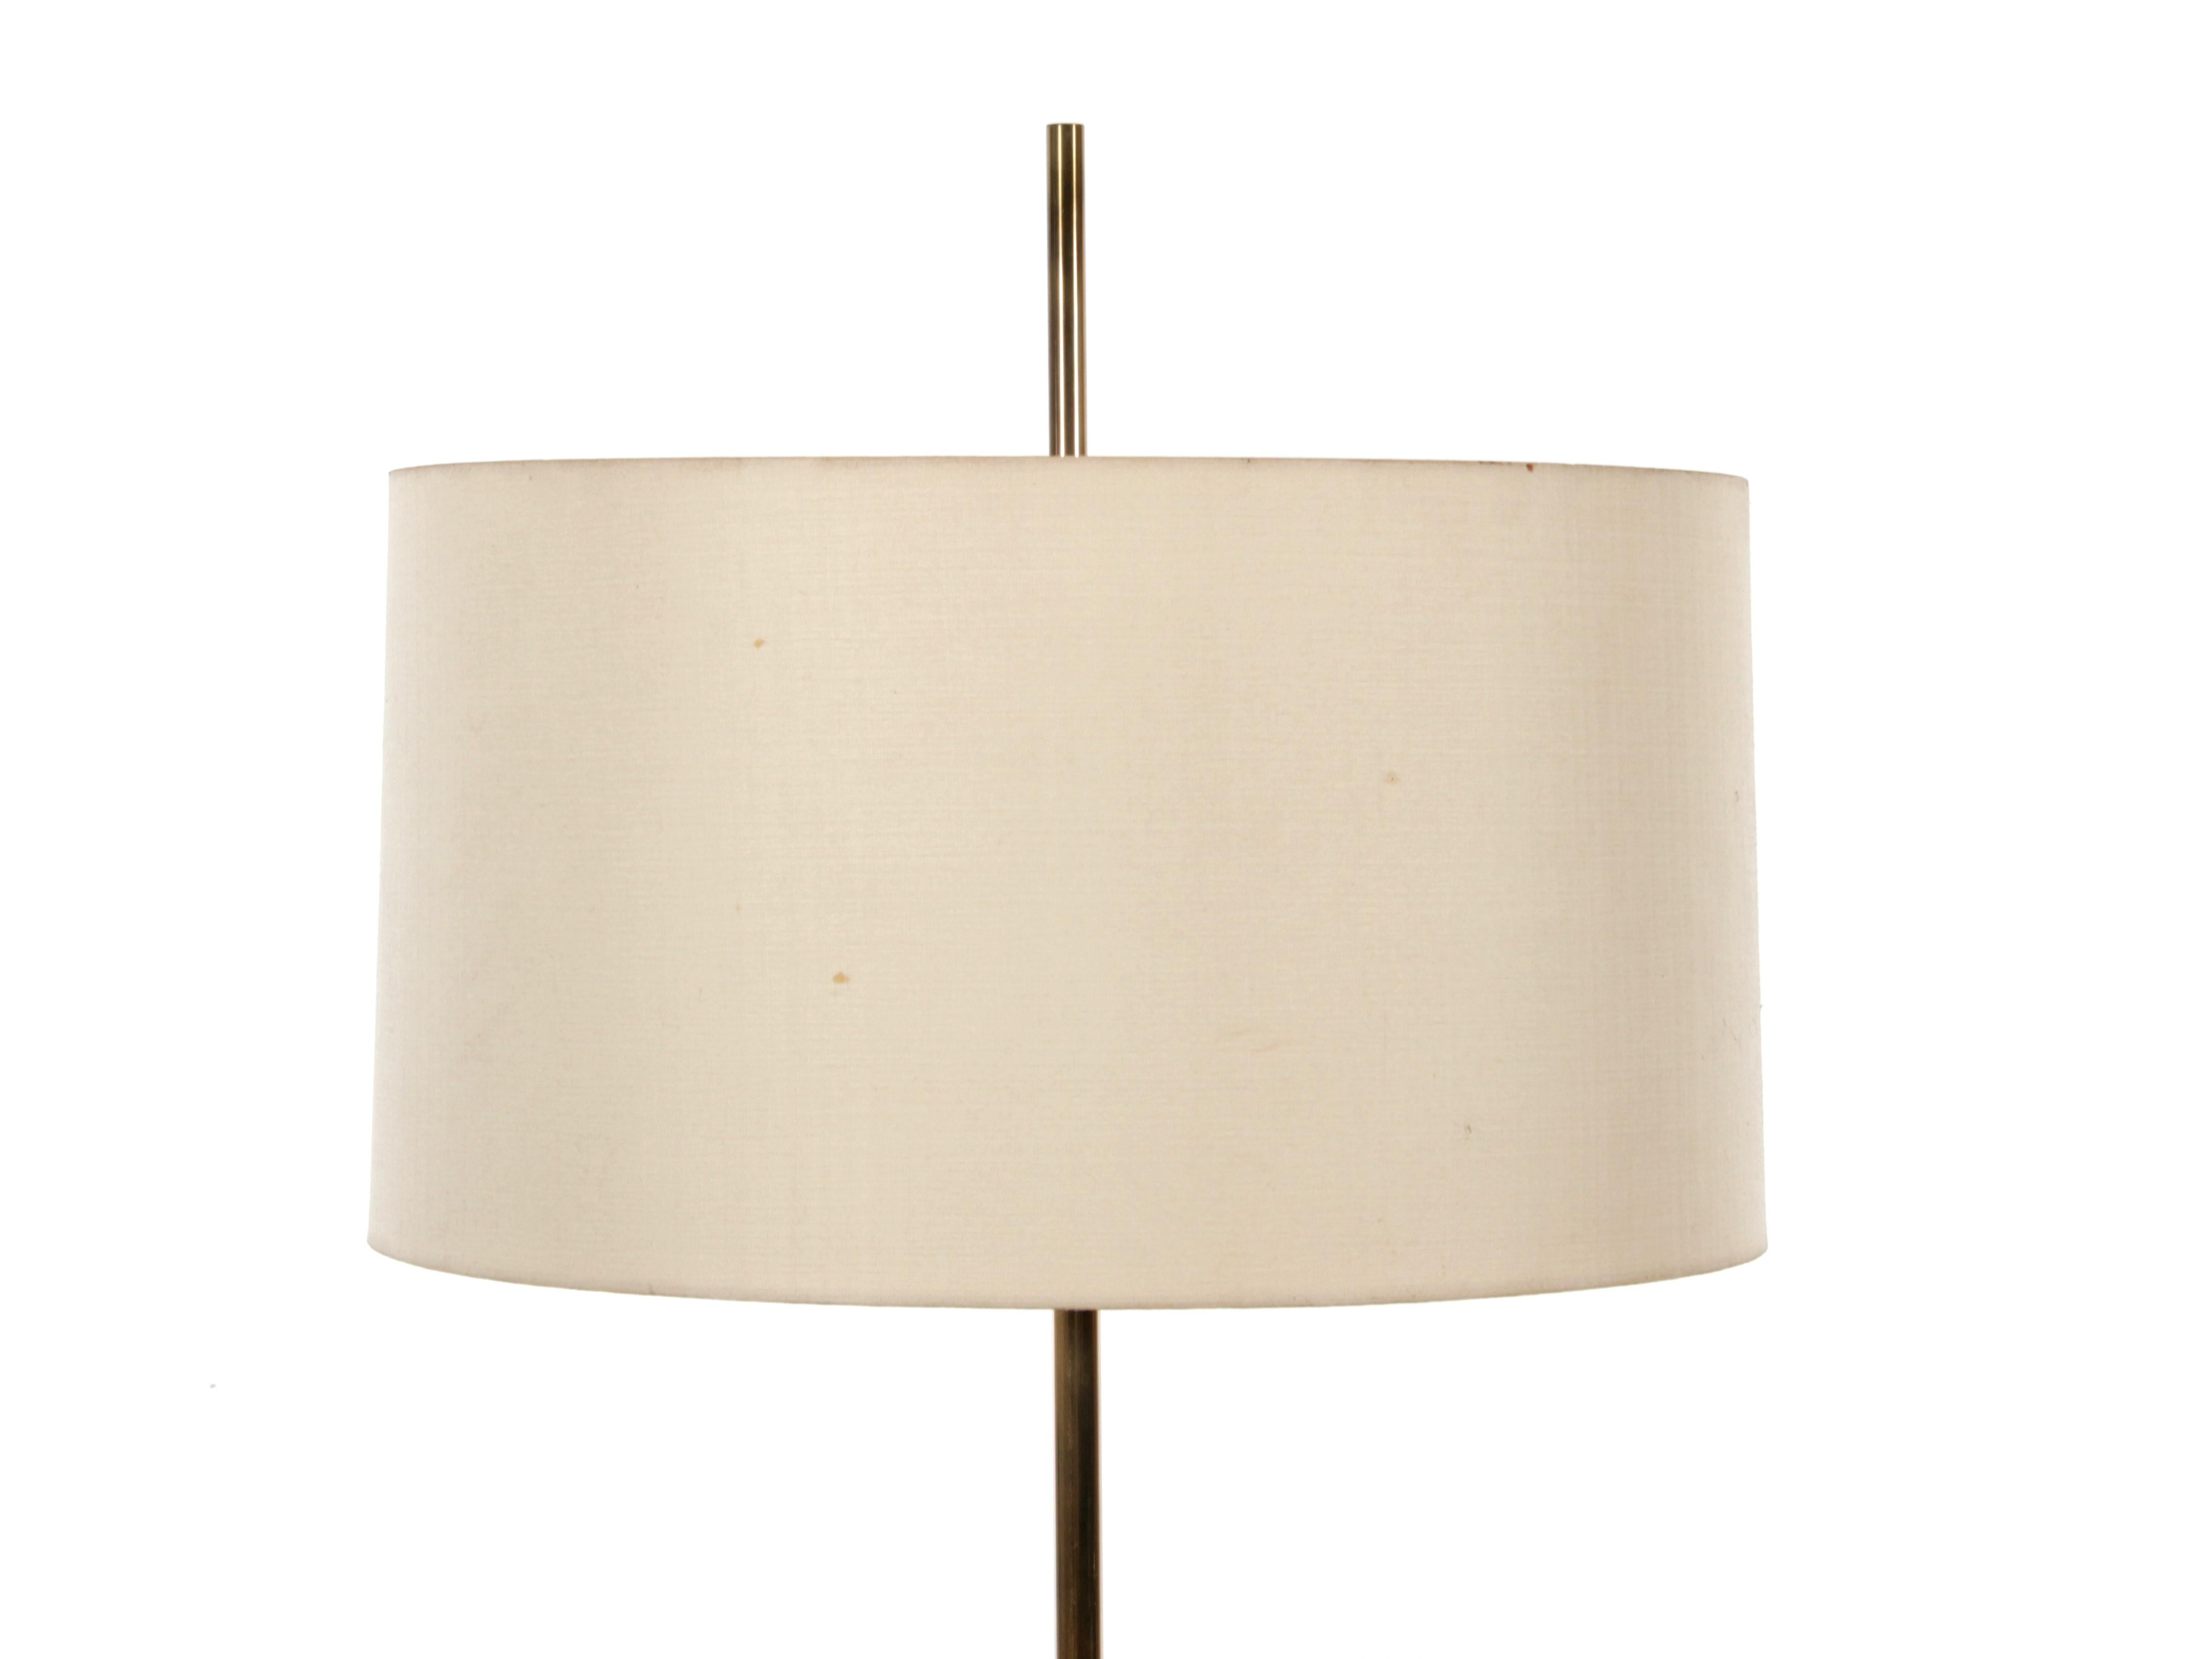 Mid-Century Modern scandinavian floor lamp in brass. 2 pieces available. Price is for 1 item. Comes with original shade.

Measures: H: 161 cm
Ø shade: 44 cm. Ø base: 24 cm.